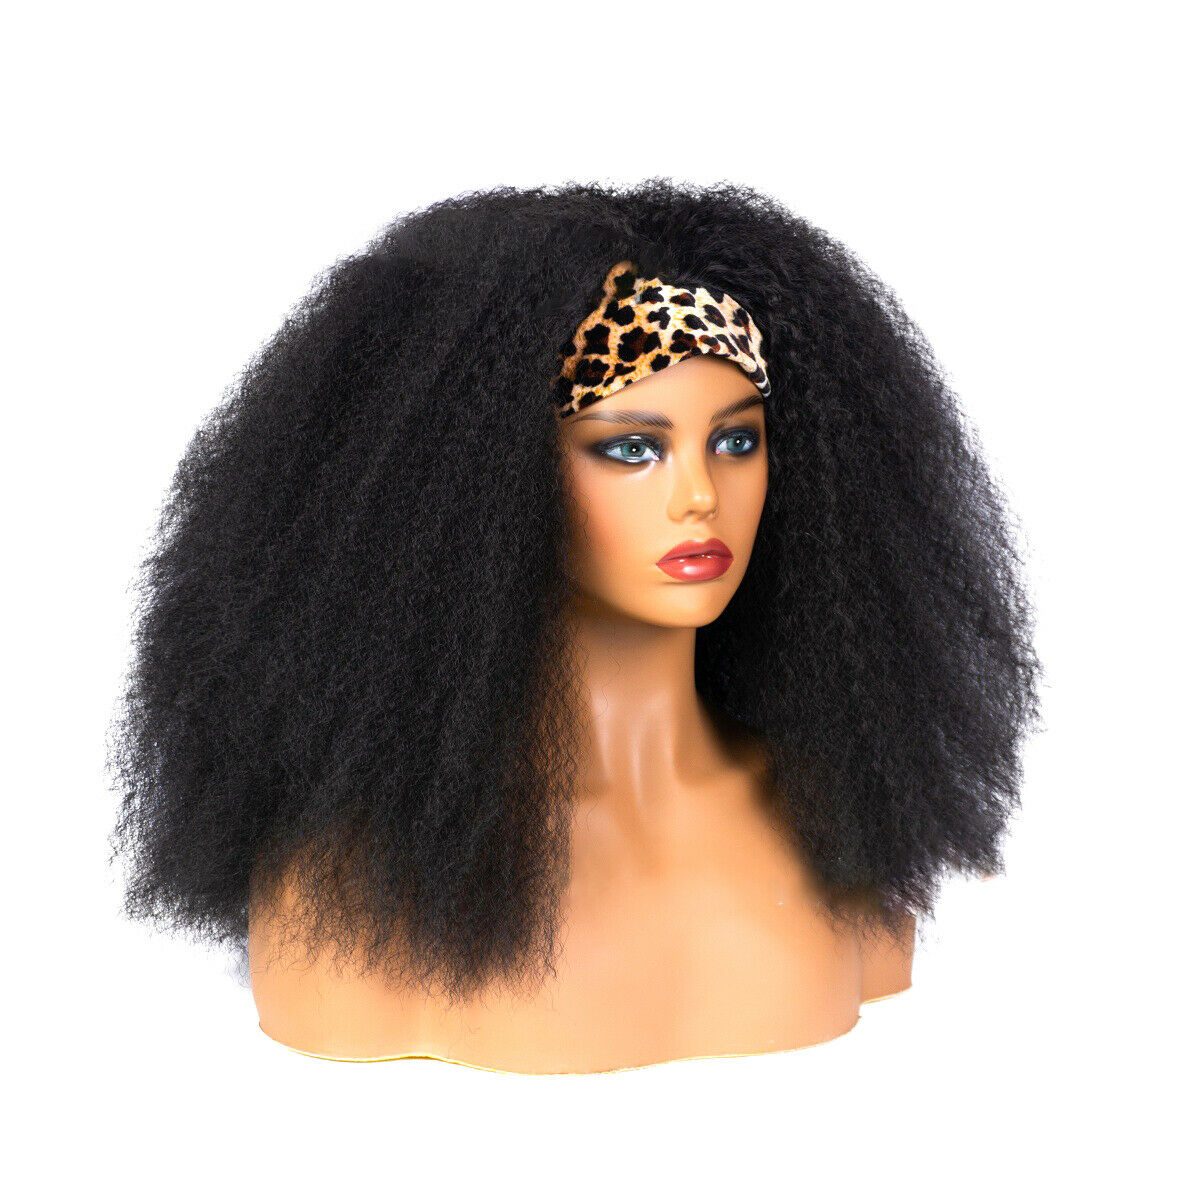 Afro Yaki Kinky Straight Wrap Wigs for Black Women African Curly Hair Full Wigs